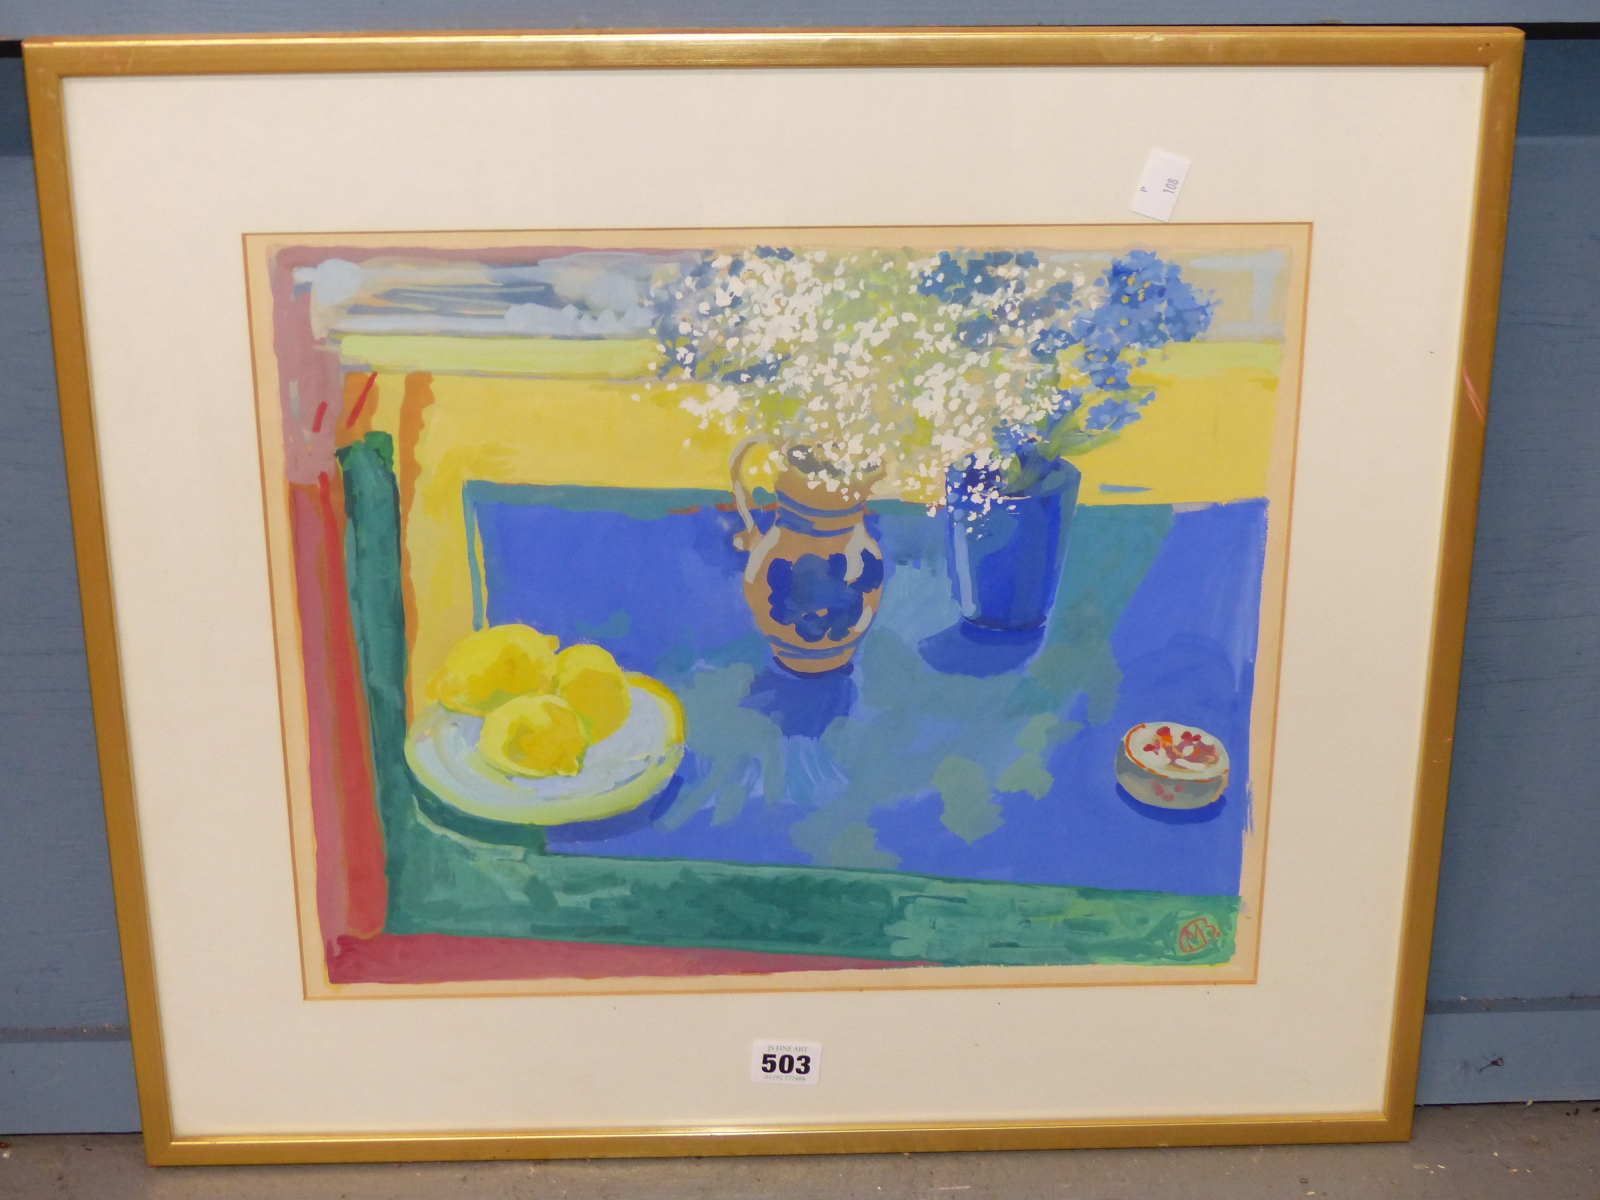 MOLLIE BINFIELD (20TH CENTURY), GYPSOPHILA AND LEMONS, SIGNED WITH INITIALS, GOUACHE, 43 x 35cms, - Image 7 of 9